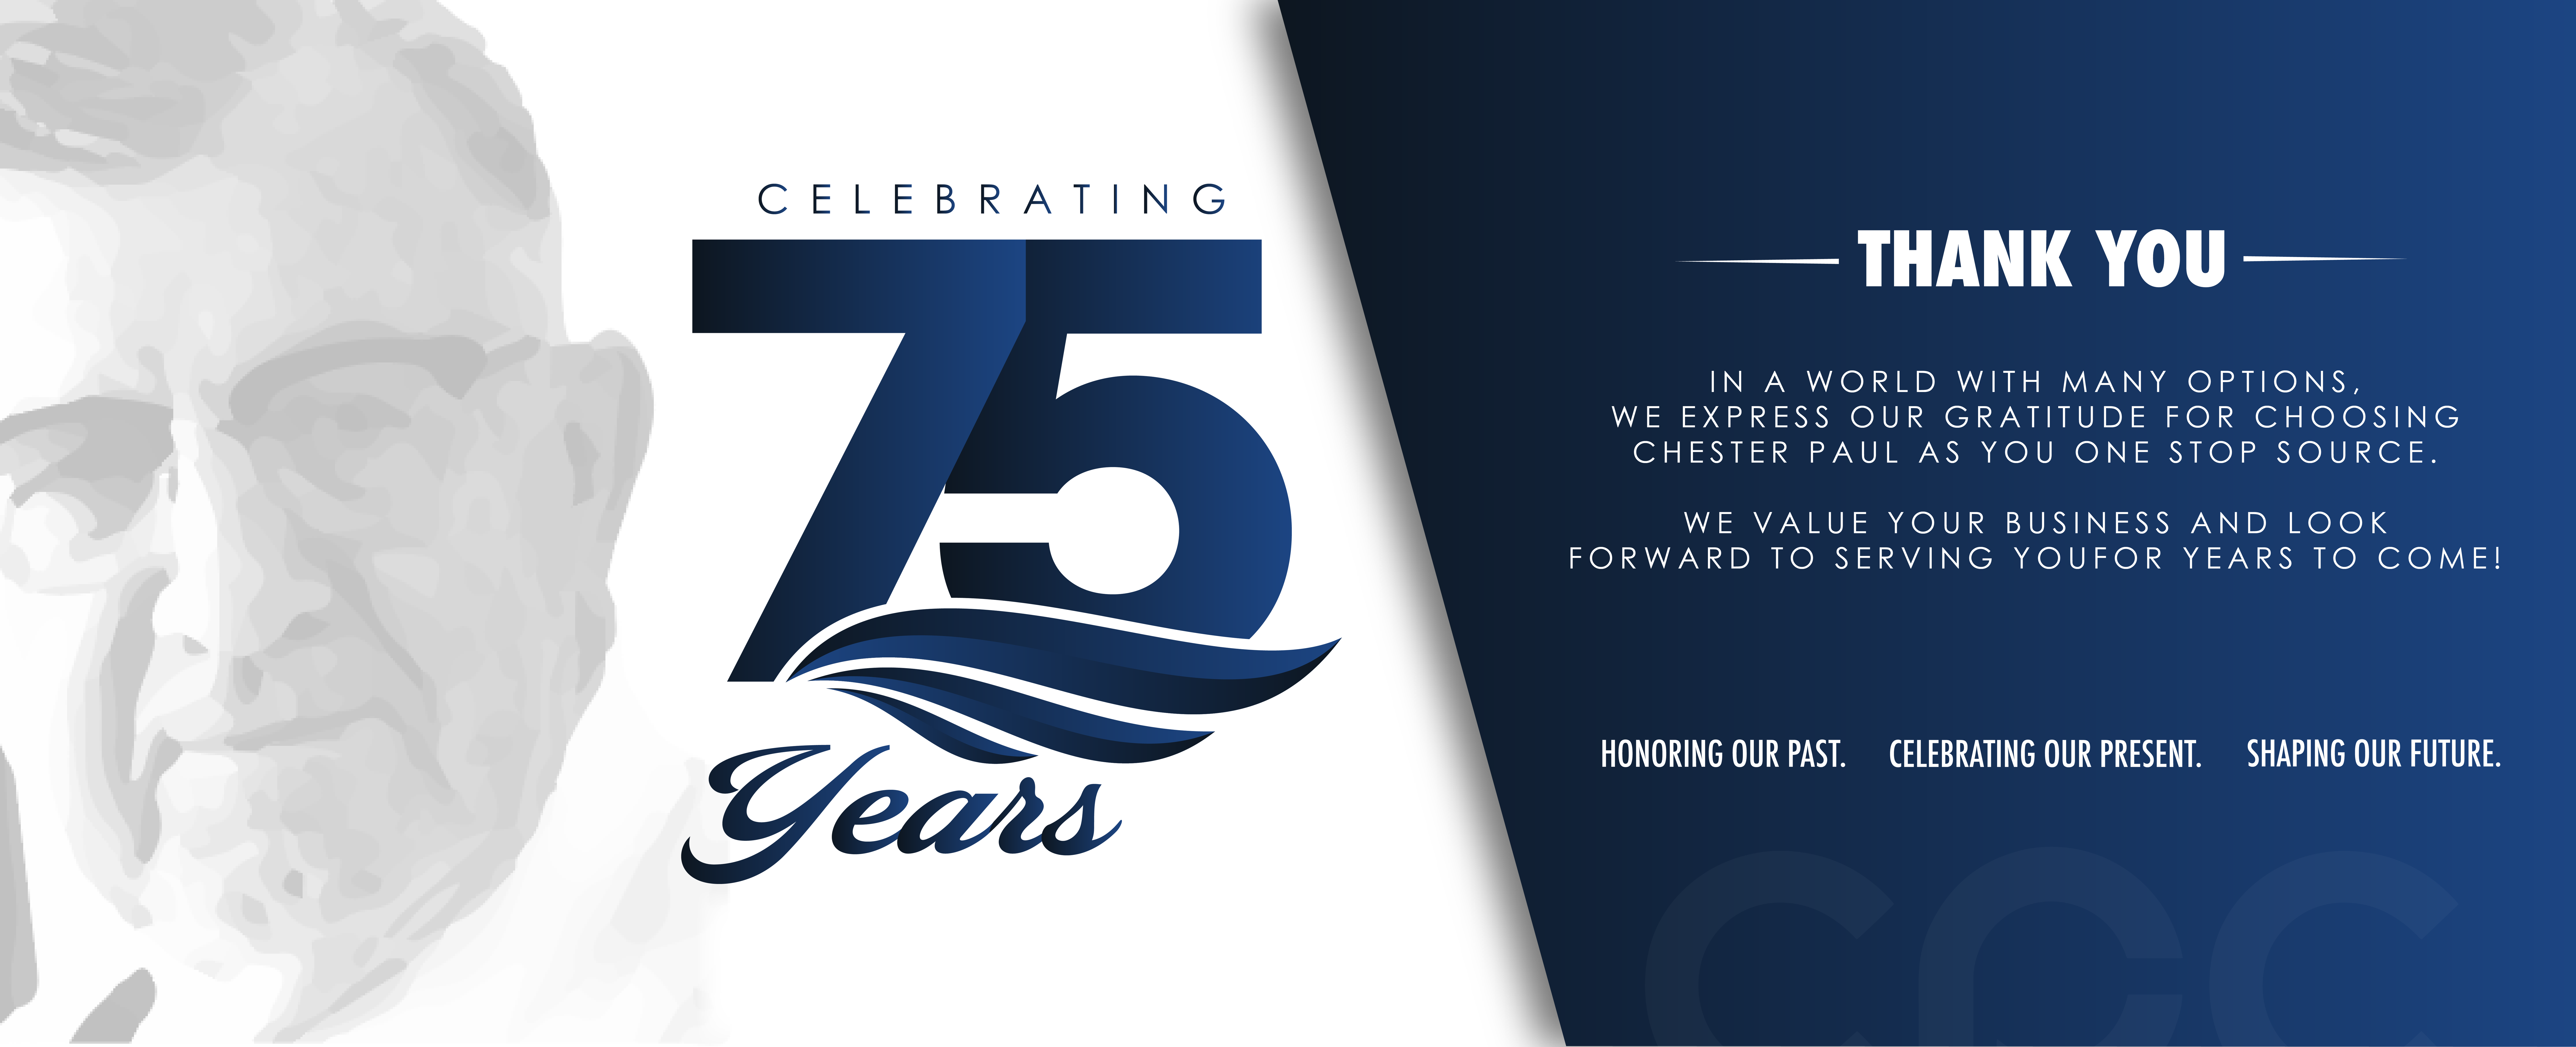 Celebrating 75 years in business